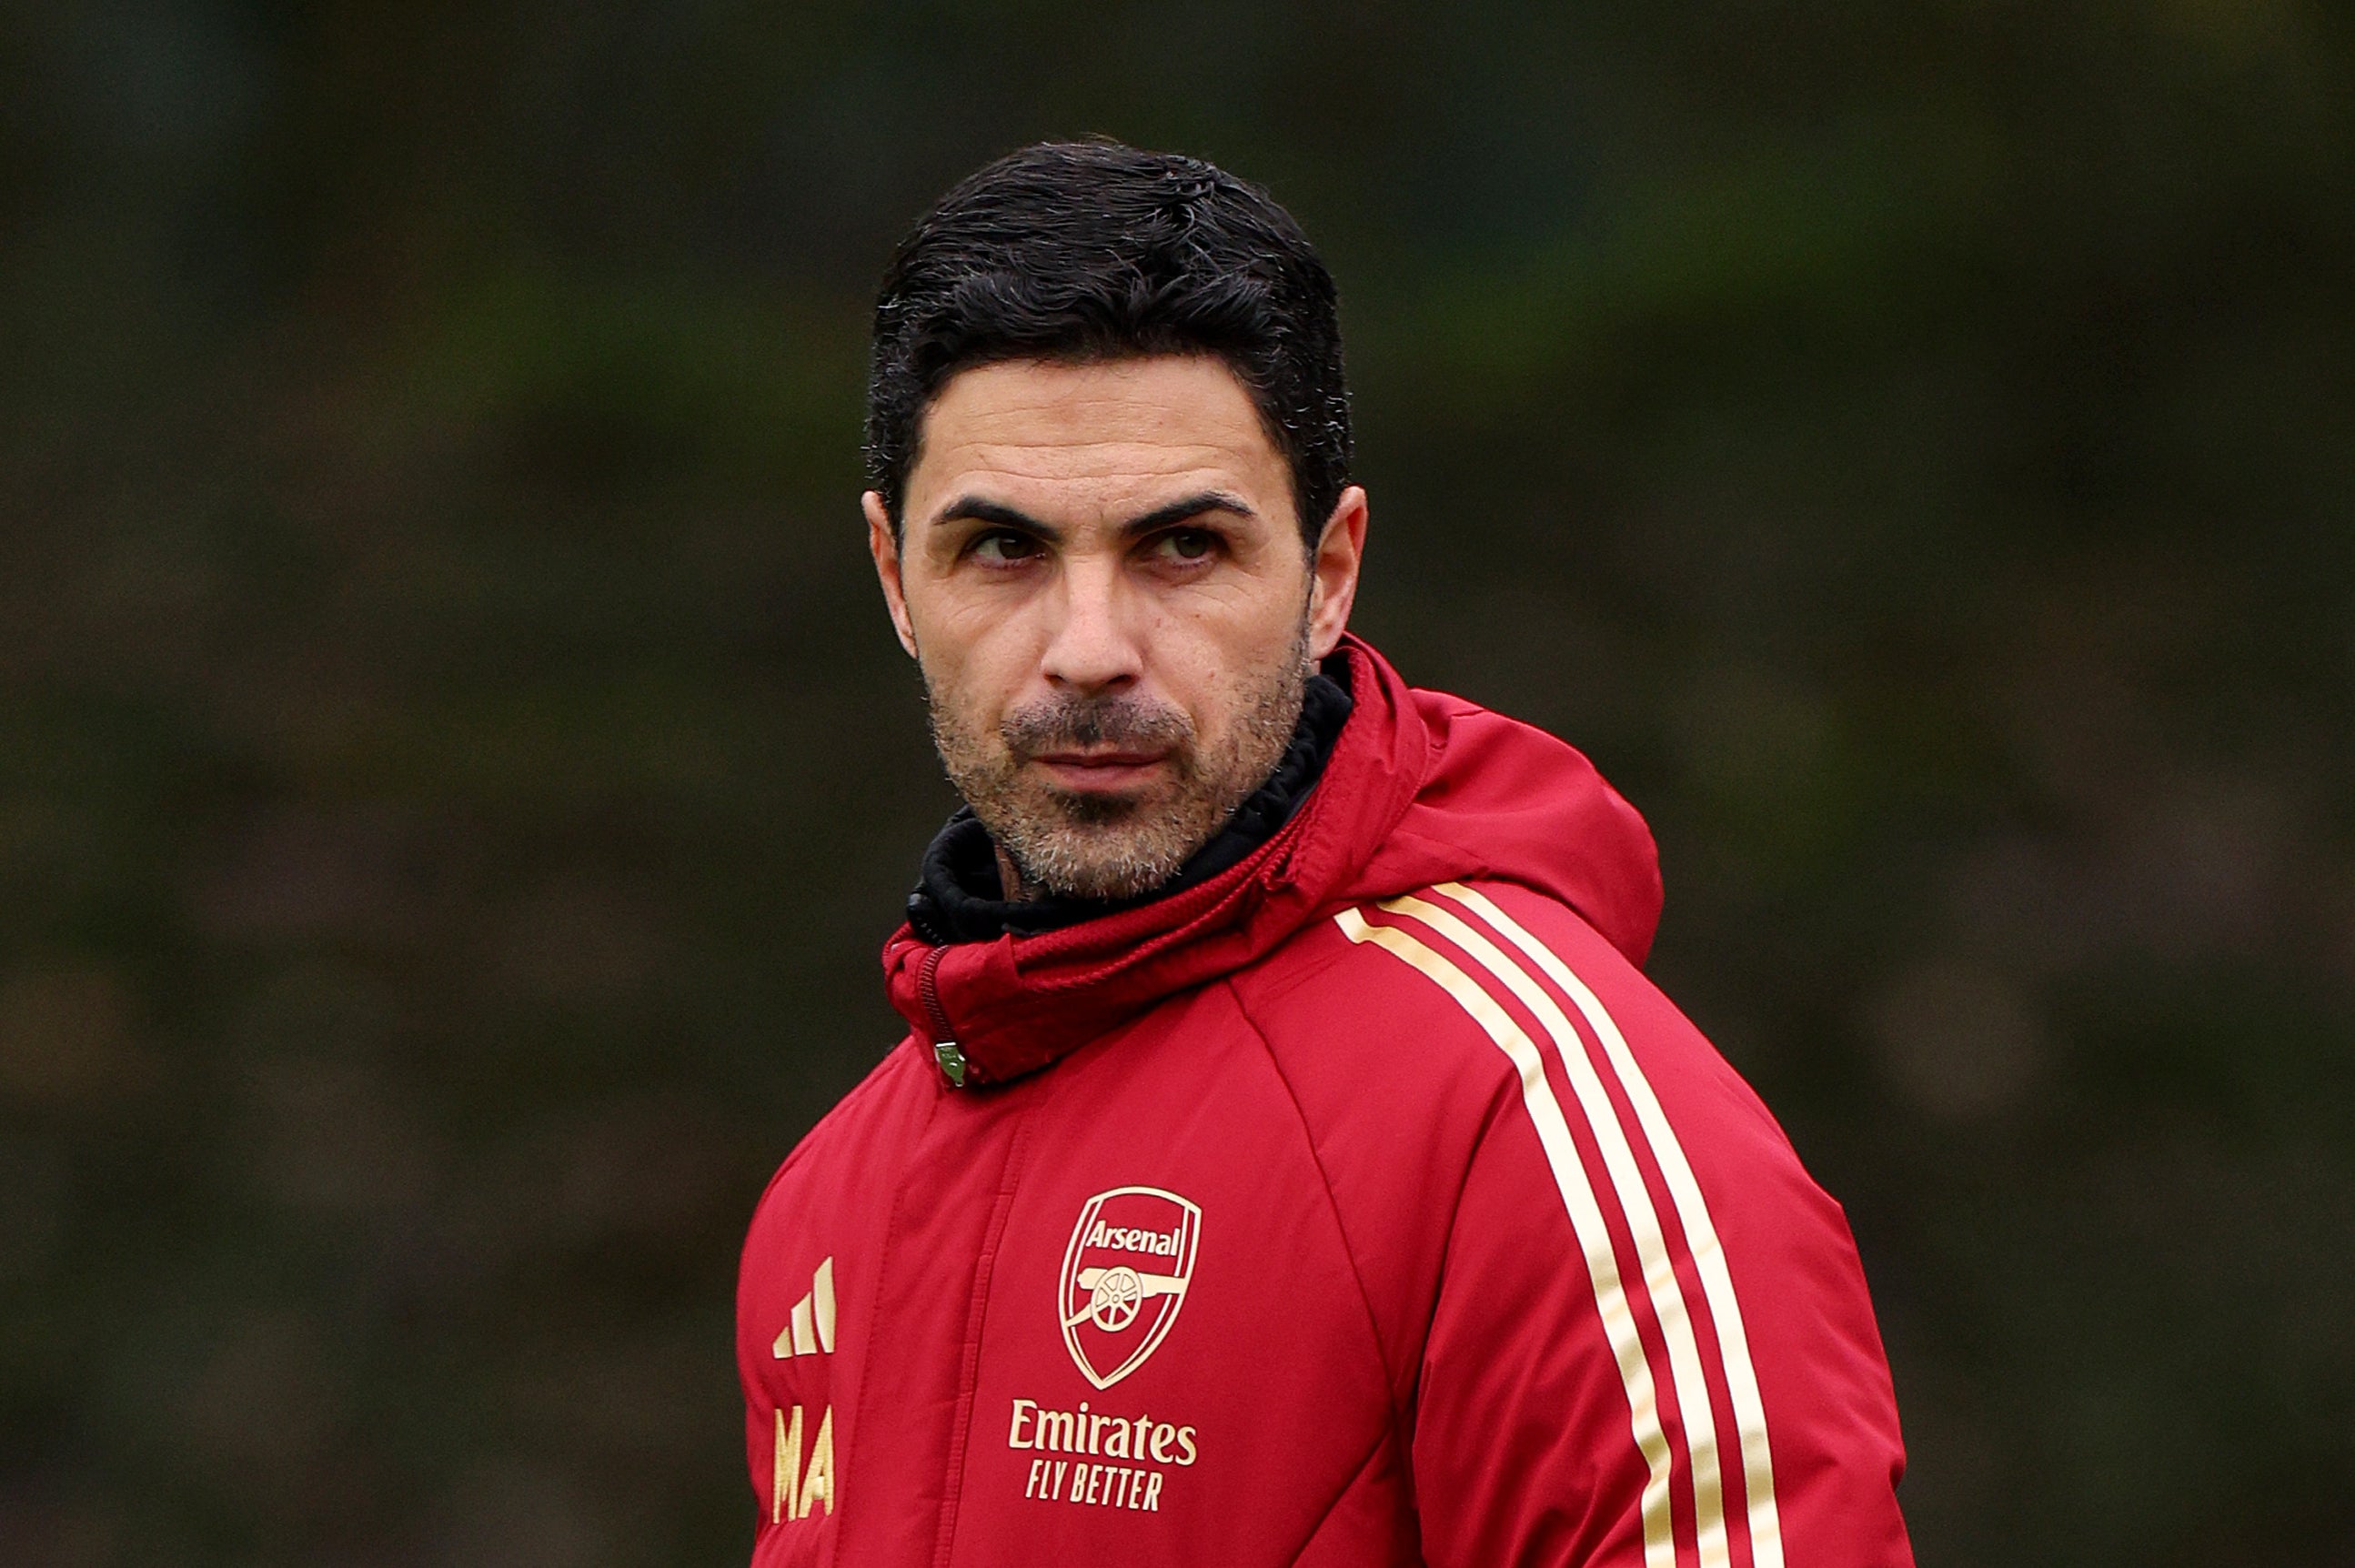 Mikel Arteta has helped Arsenal to evolve after damaging defeats to Man City last season